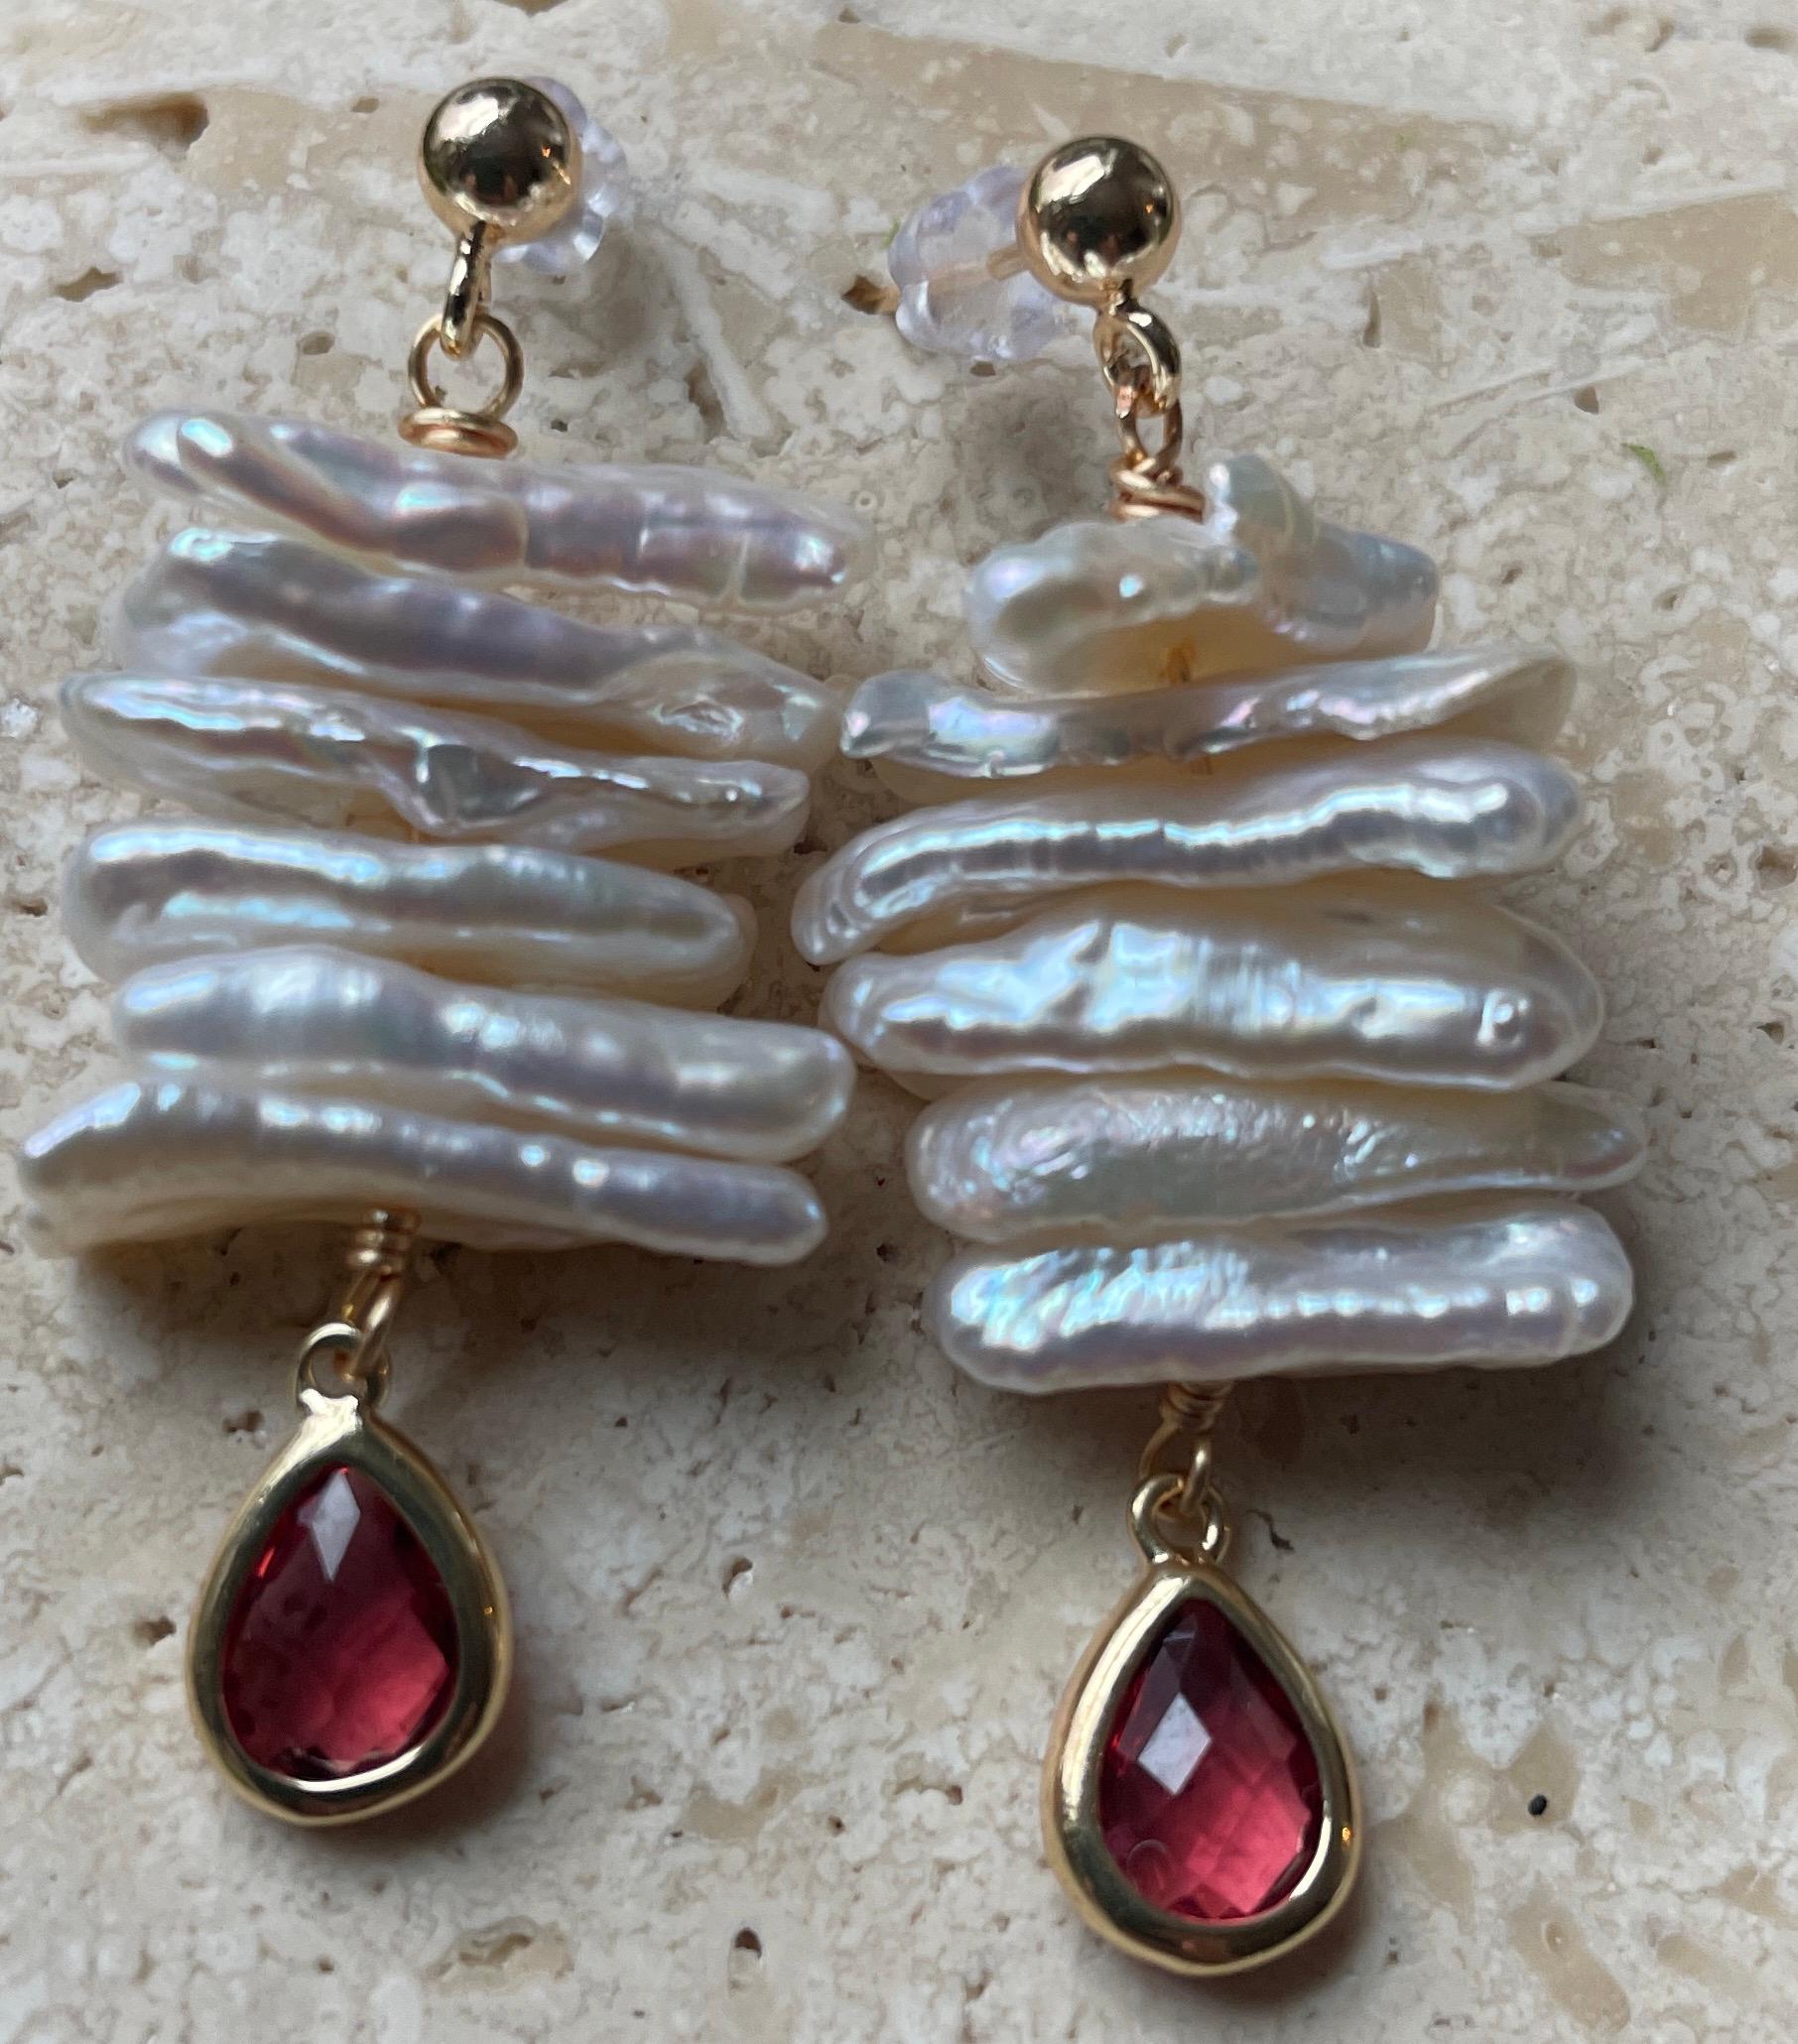 14K Gold Plated Keshi Pearl Earrings with Garnet Pear stone at bottom. 